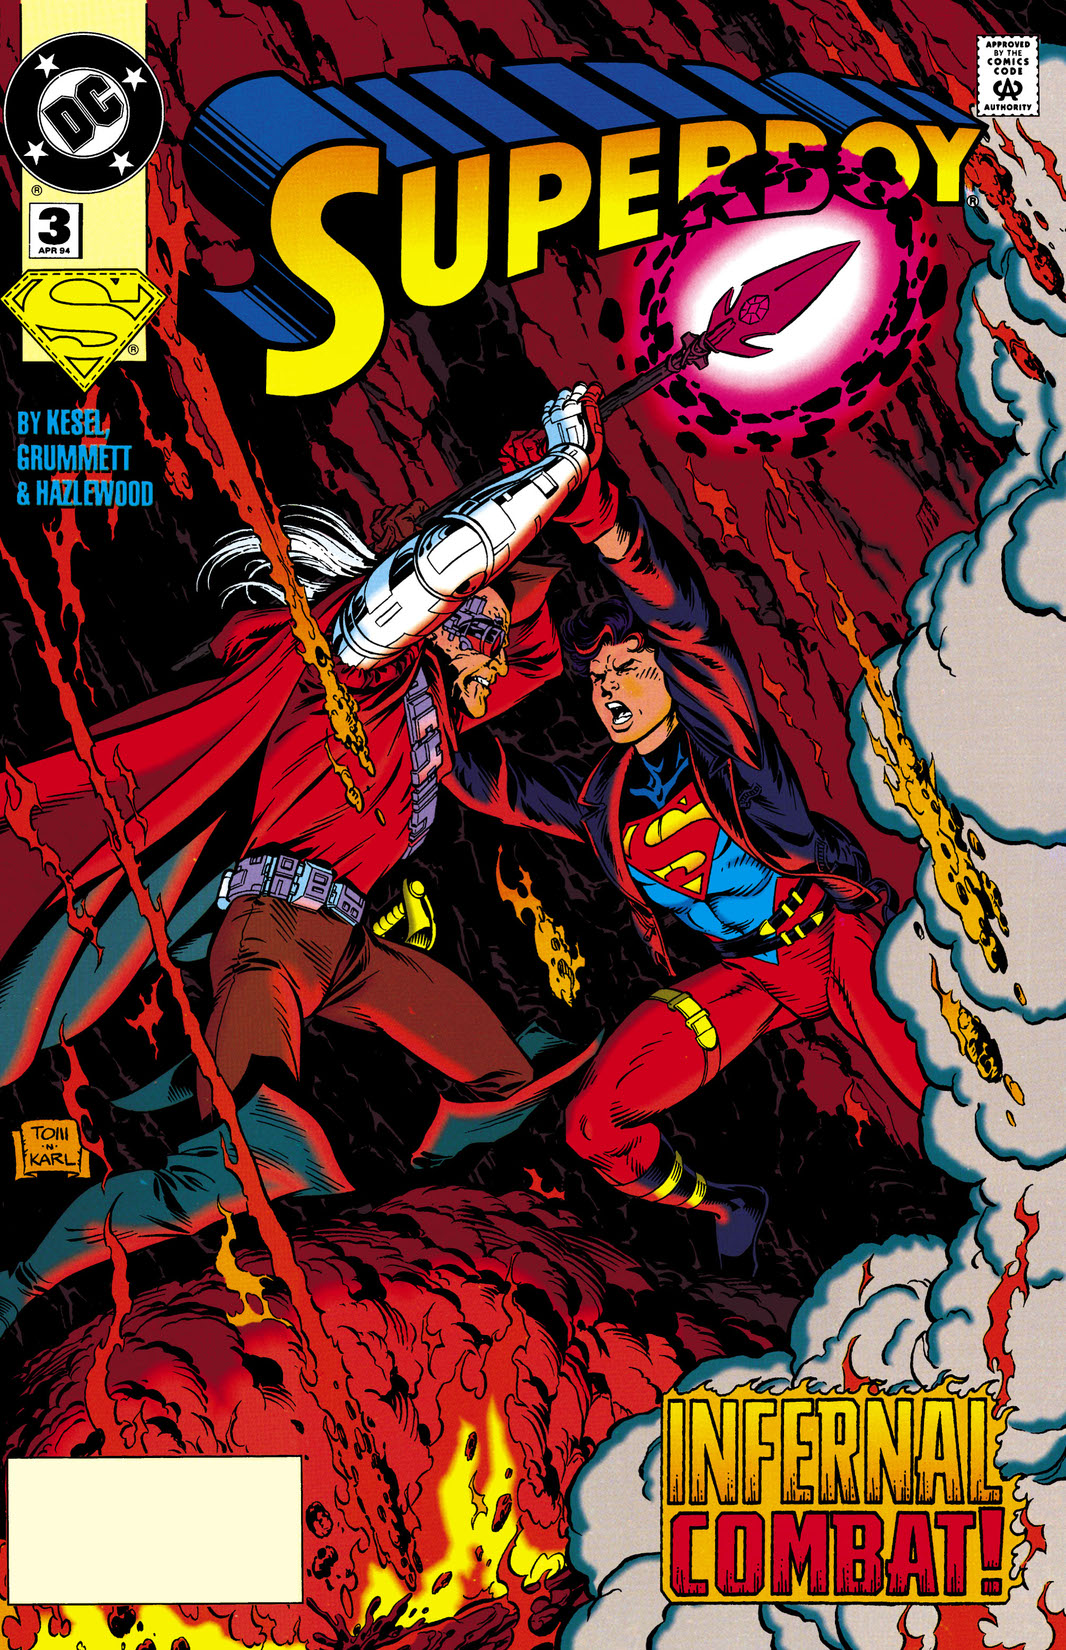 Superboy (1993-) #3 preview images